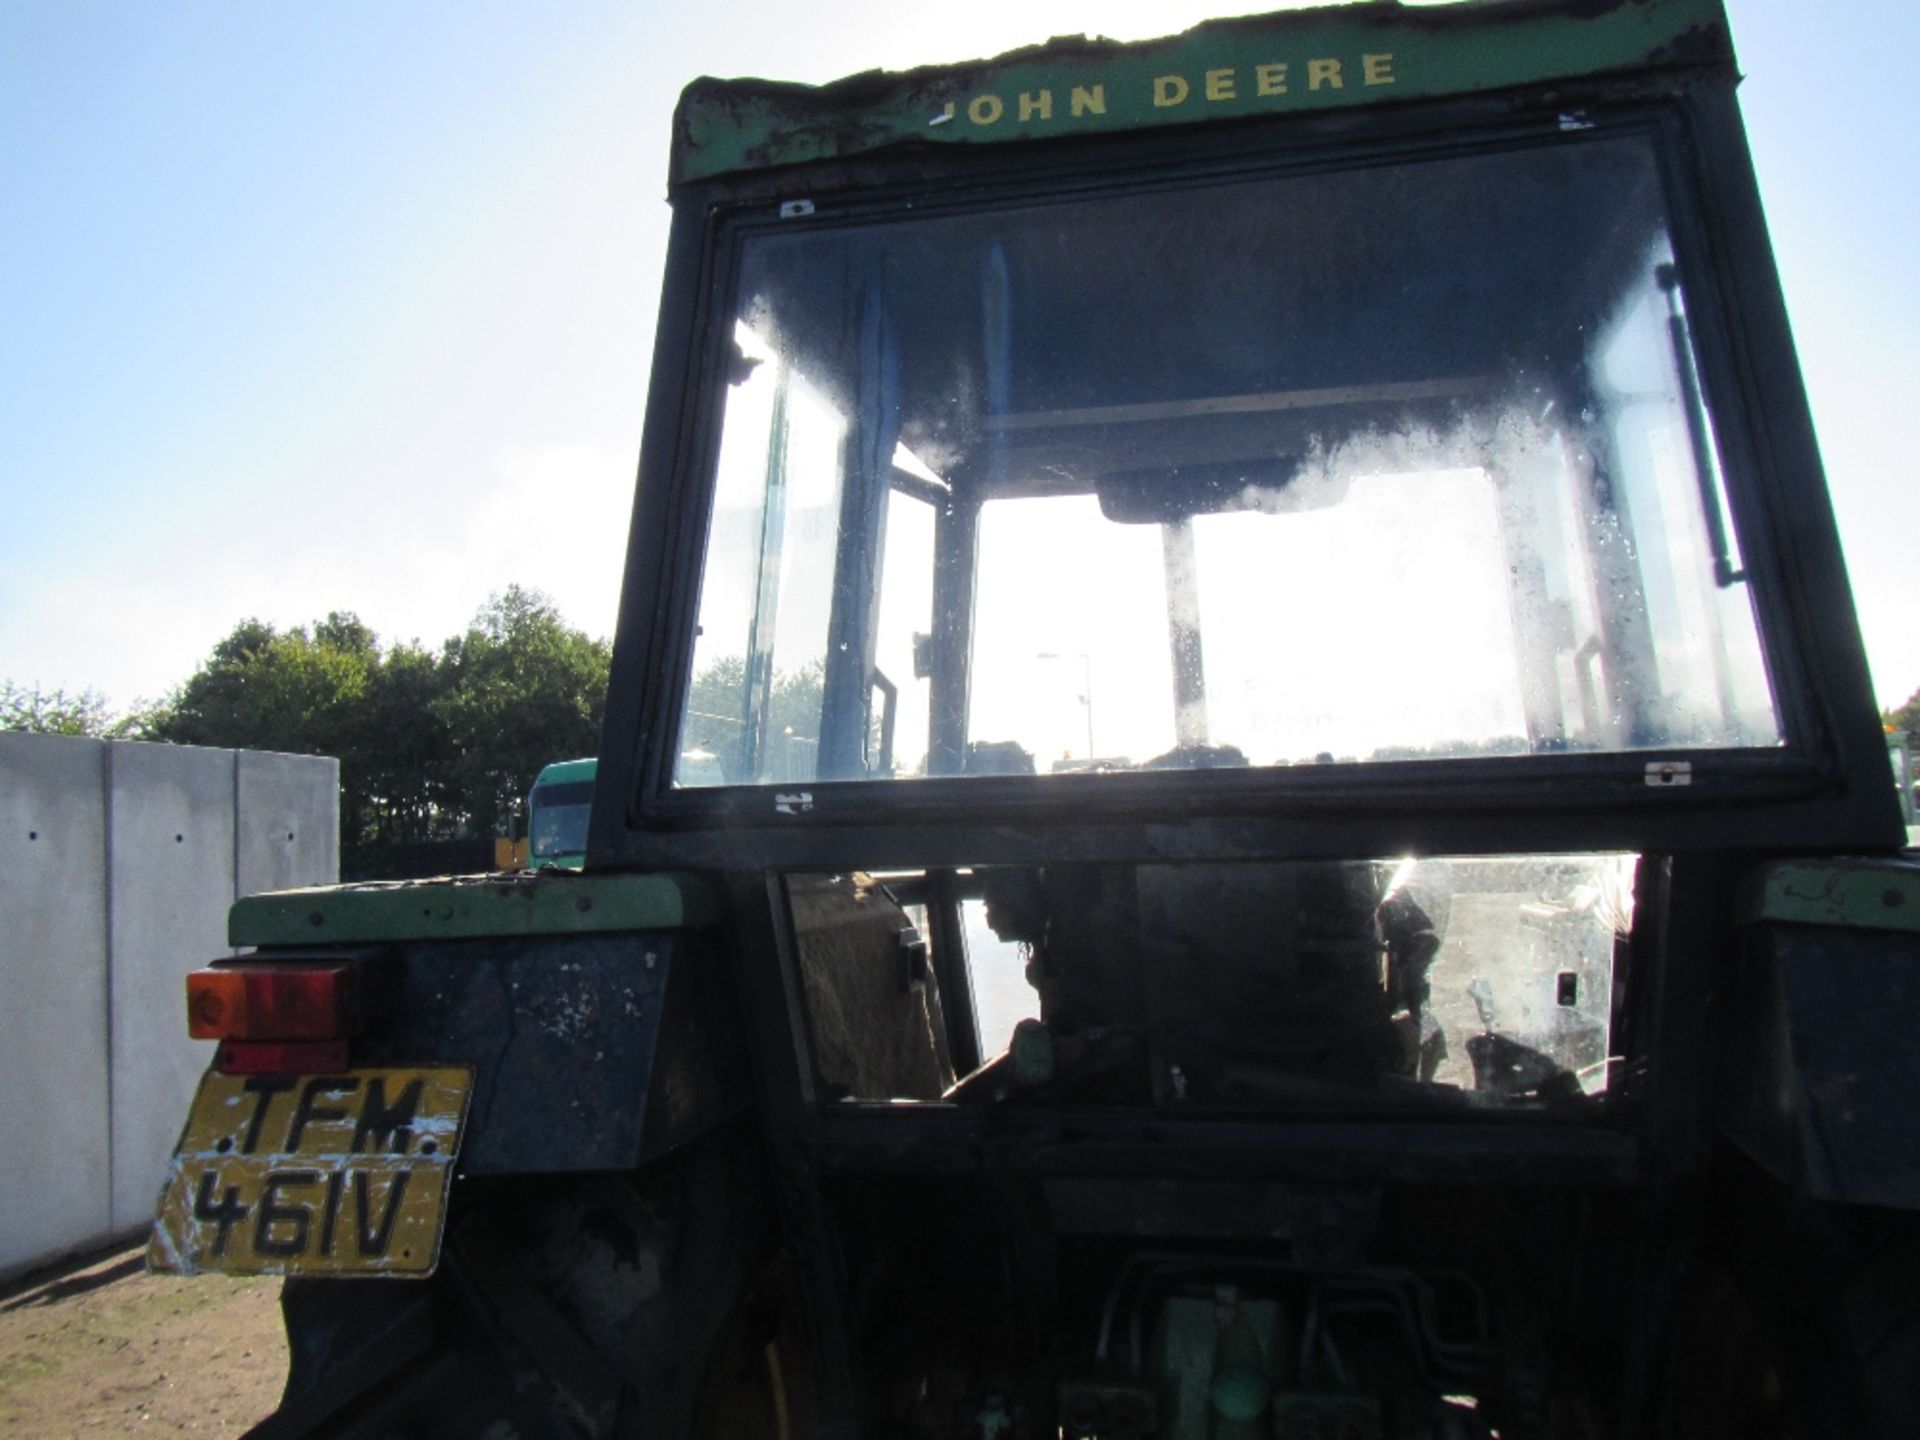 John Deere 3040 2wd Tractor with OPU Cab Reg. No. TFM 461V Ser No 364600 UNRESERVED LOT - Image 8 of 16